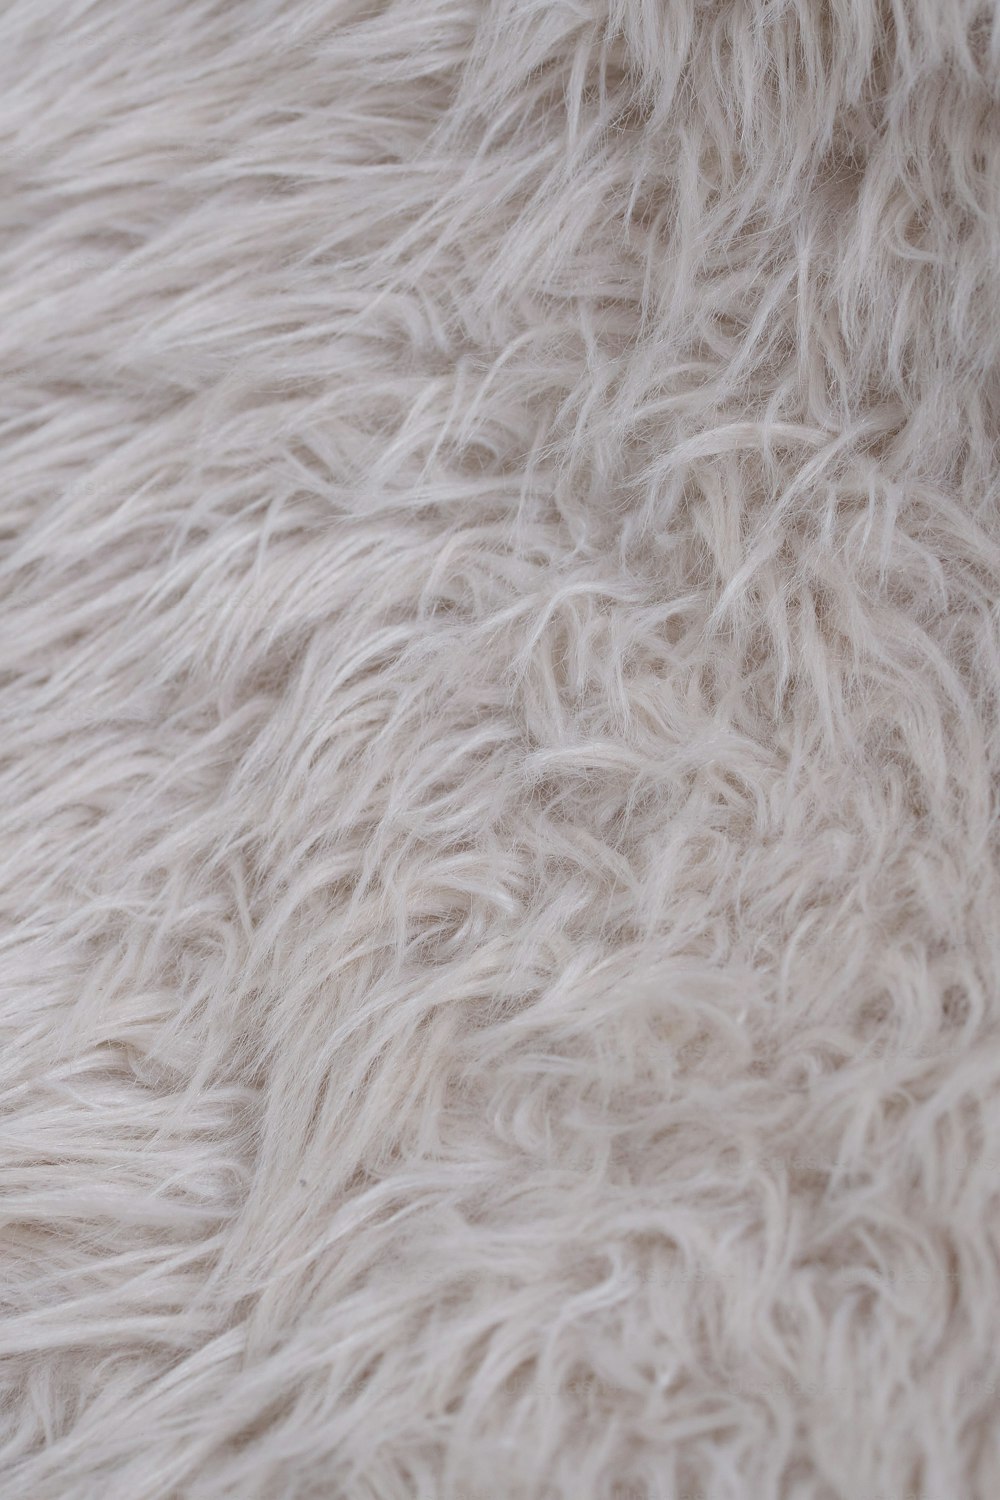 White Delicate Soft Background Of Plush Fabric Texture Of Beige